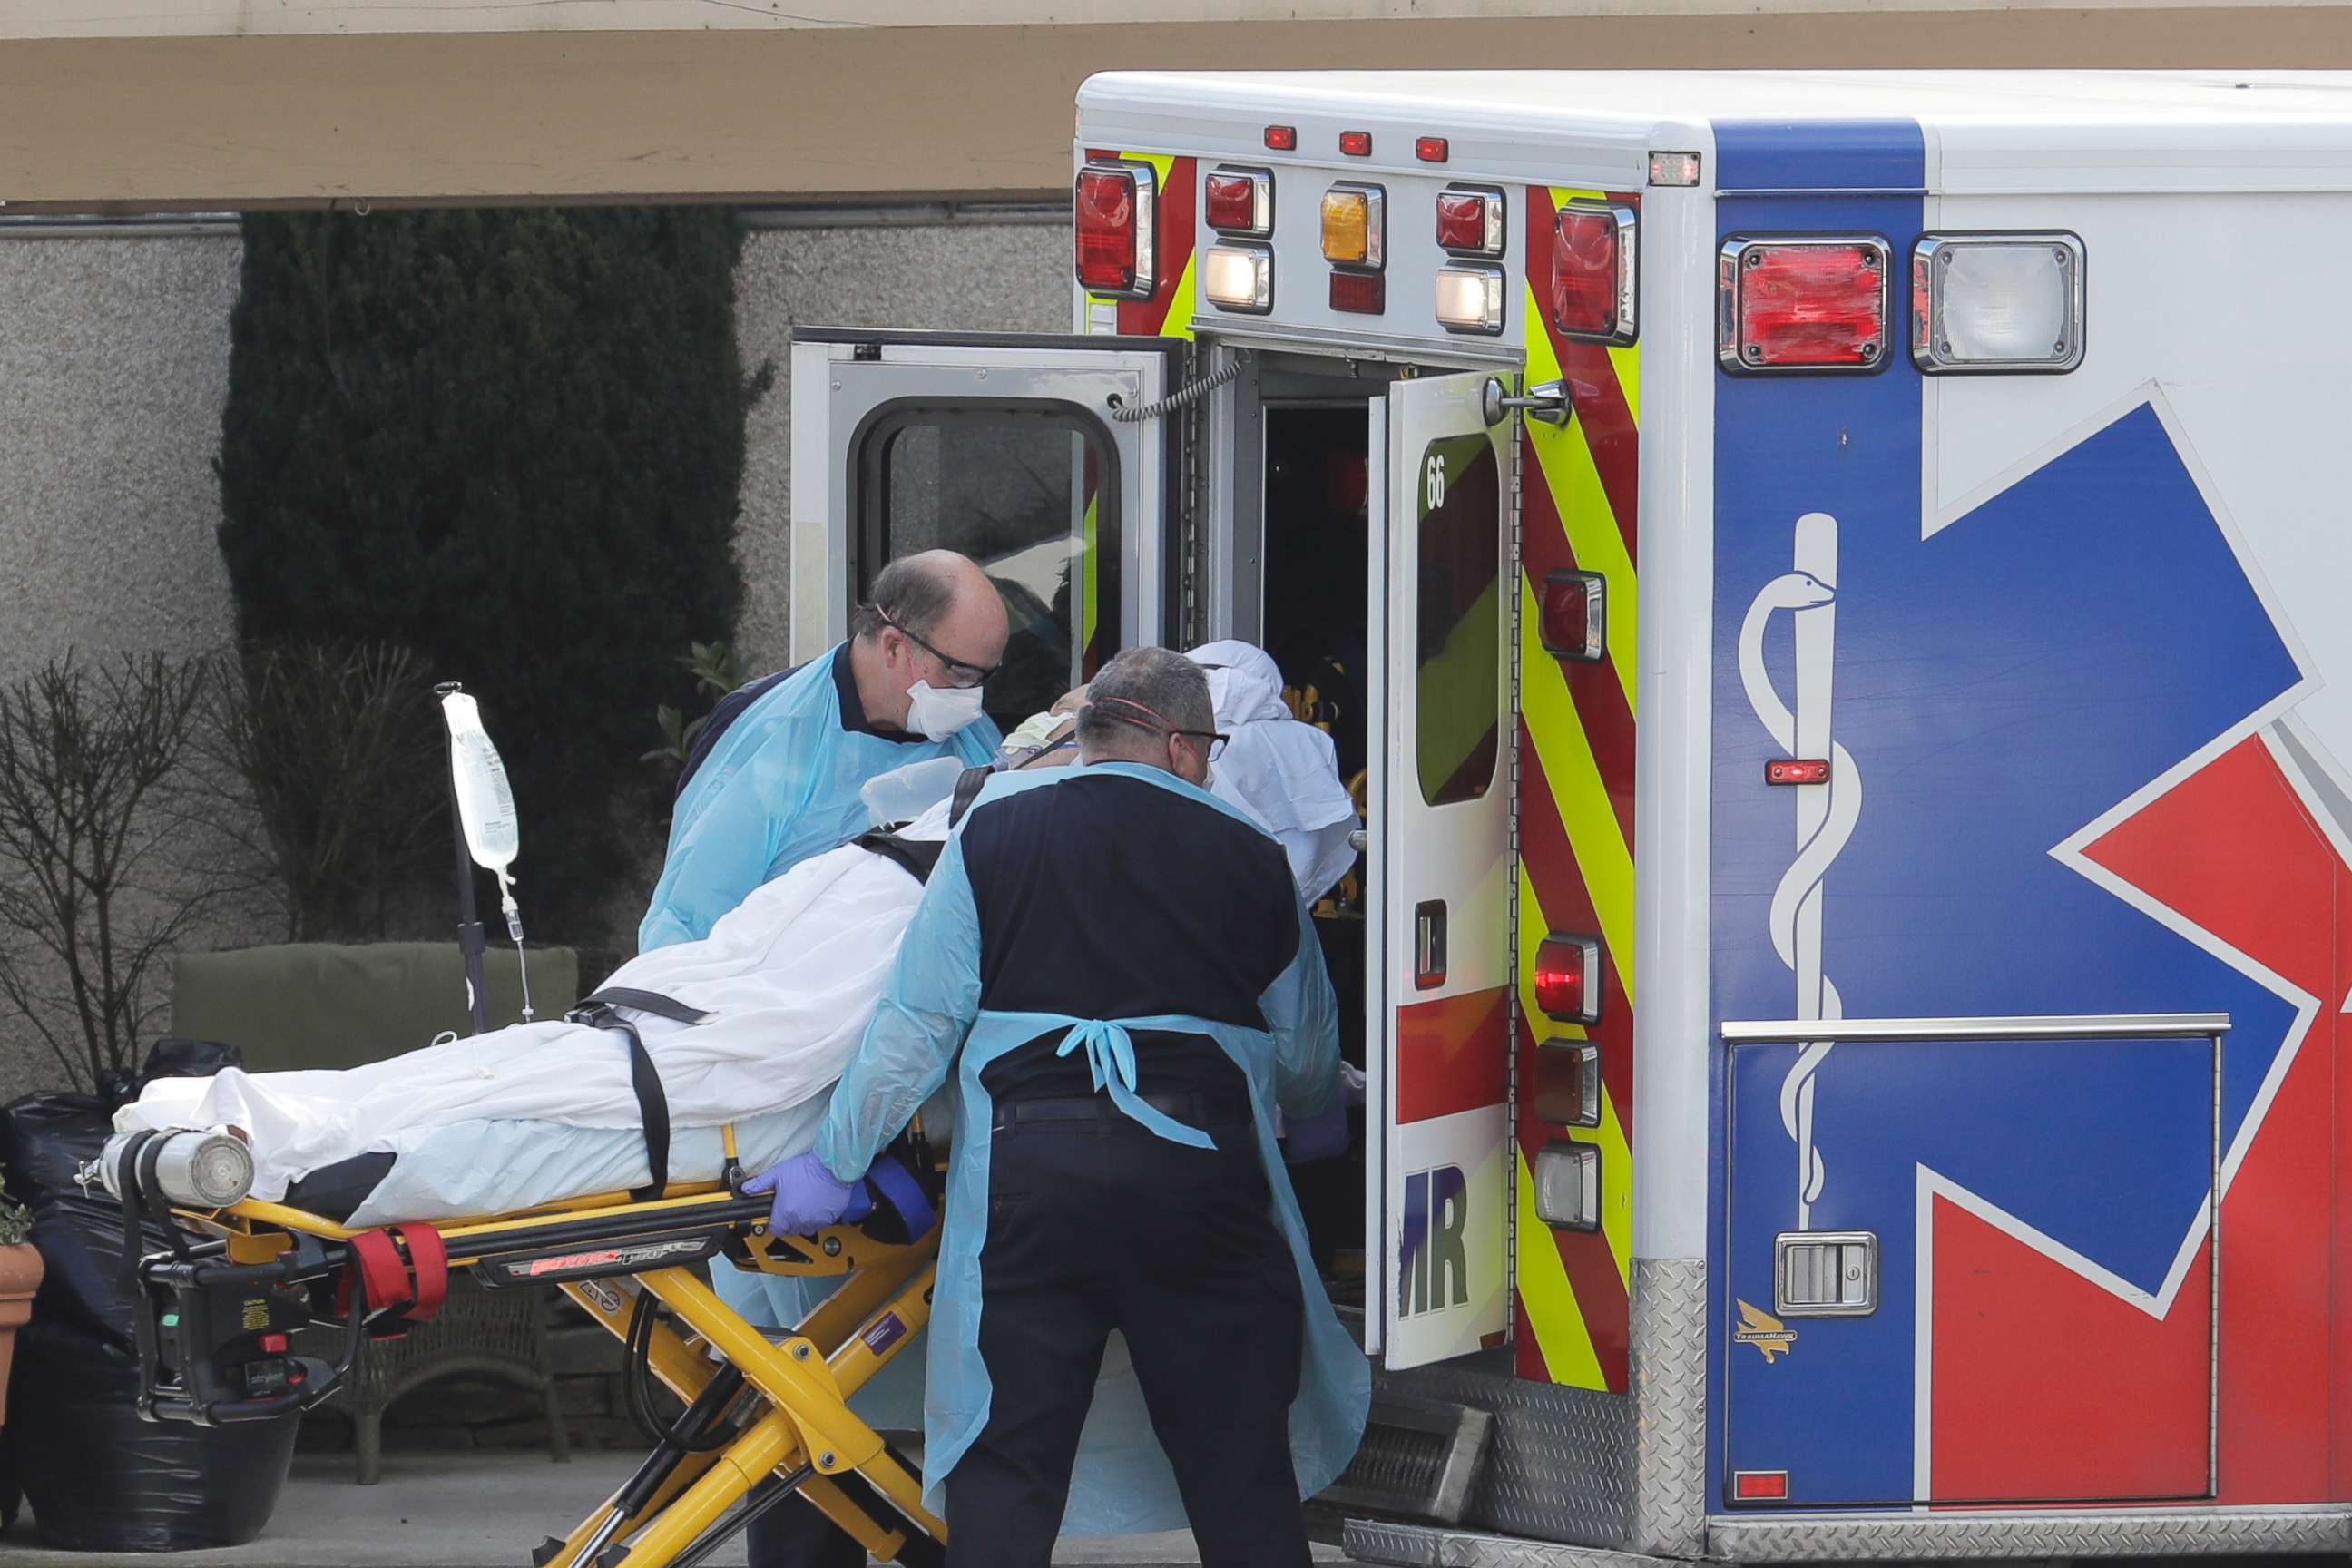 PHOTO: A person is loaded into an ambulance, Thursday, March 12, 2020, at the Life Care Center in Kirkland, Wash., near Seattle. The nursing home is at the center of the outbreak of the COVID-19 coronavirus in Washington state.